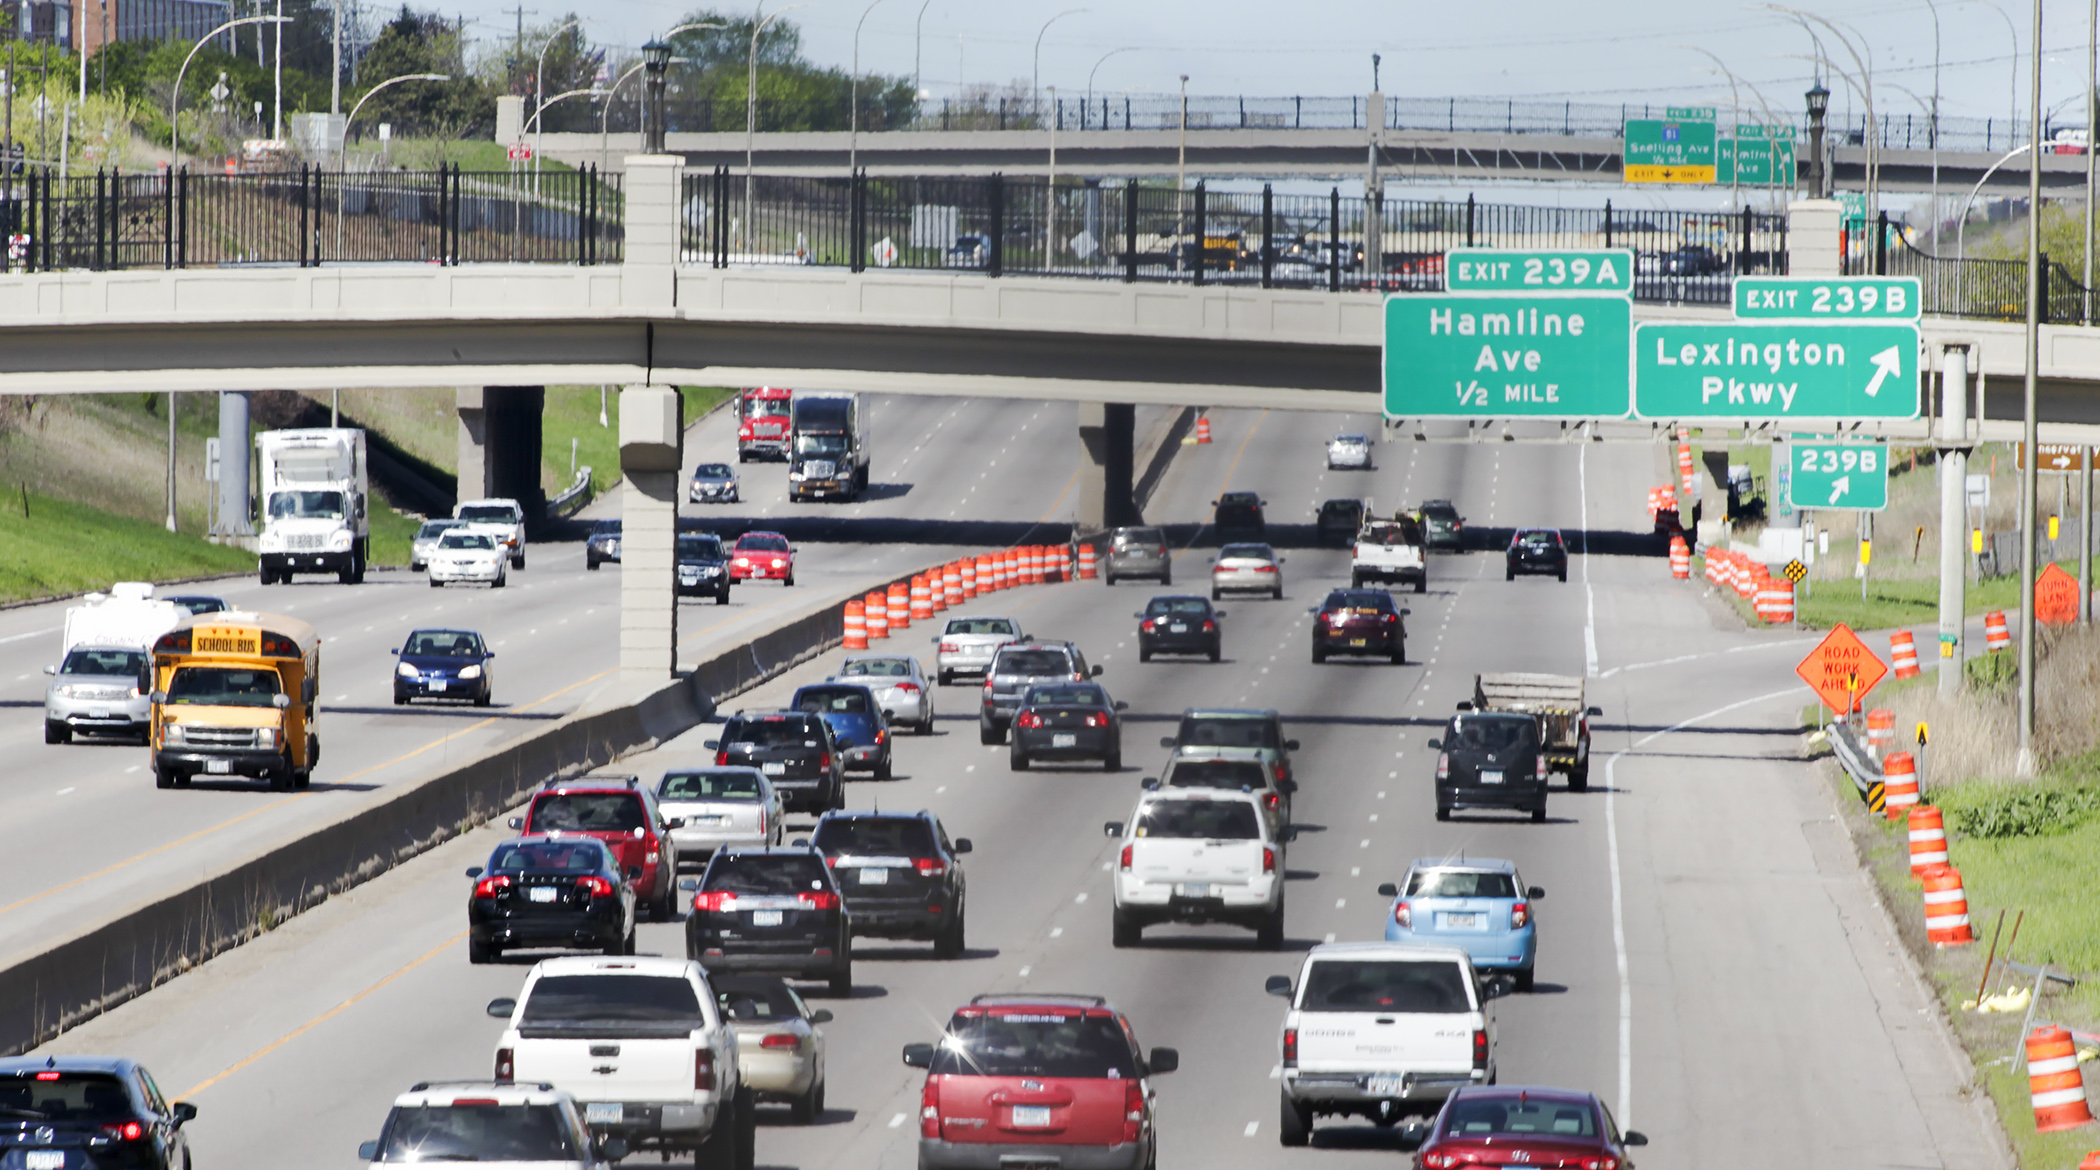 A DFL agreement to an amended transportation budget bill proposes a 50-cent fee on deliveries more than $100, indexing the state's gas tax to inflation, and increasing the metro area sales tax by 0.75% to help fund transit. (House Photography file photo)